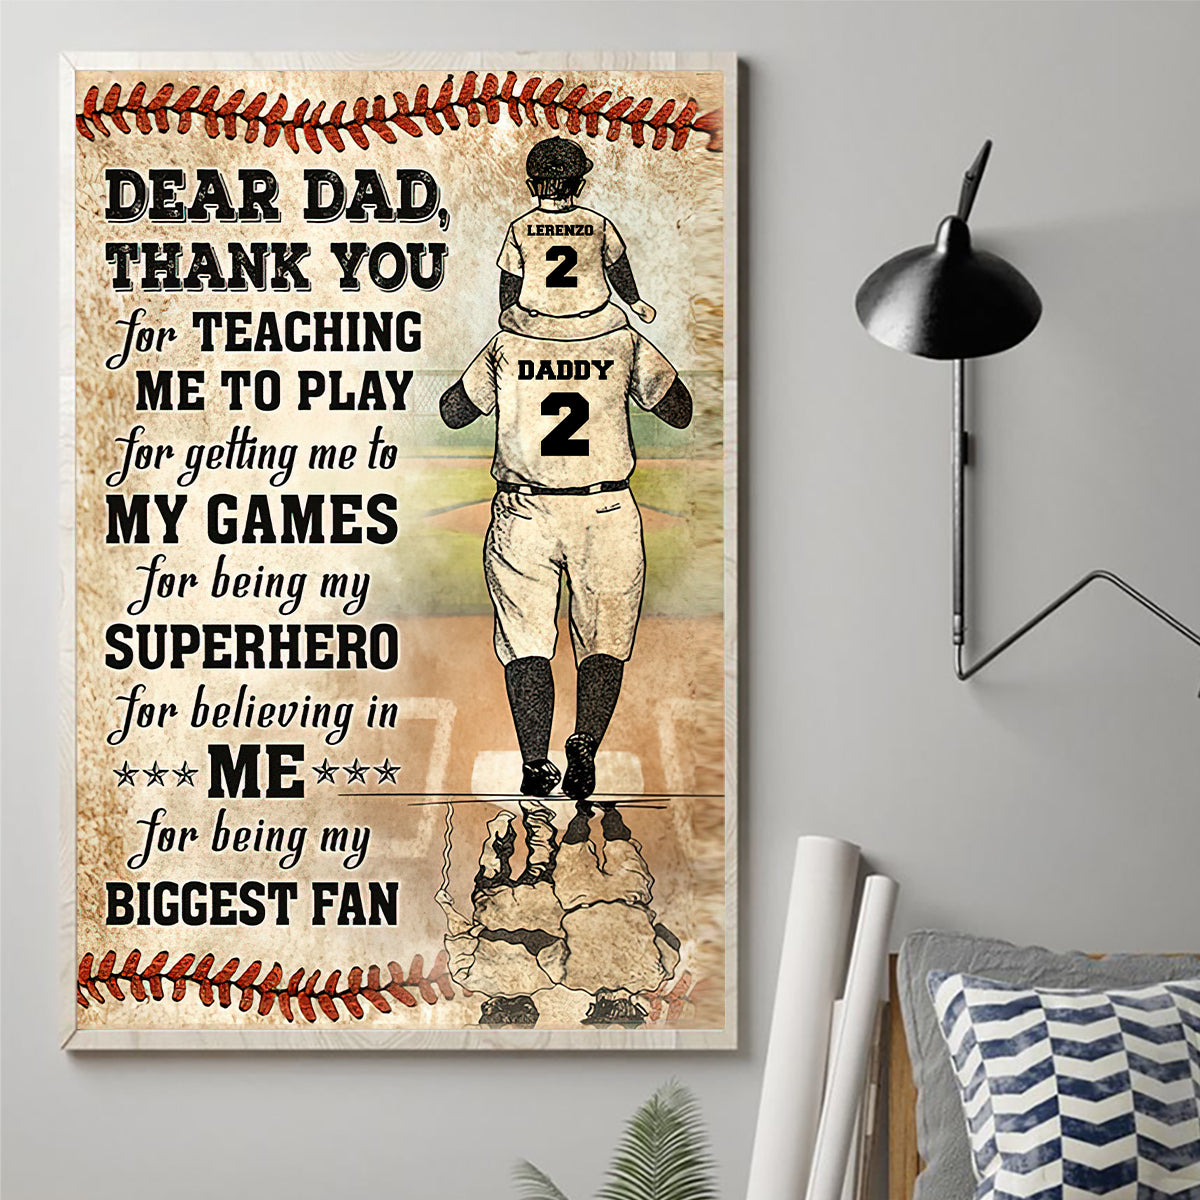 Thank You Dad My Biggest Fan - Personalized Baseball Canvas And Poster